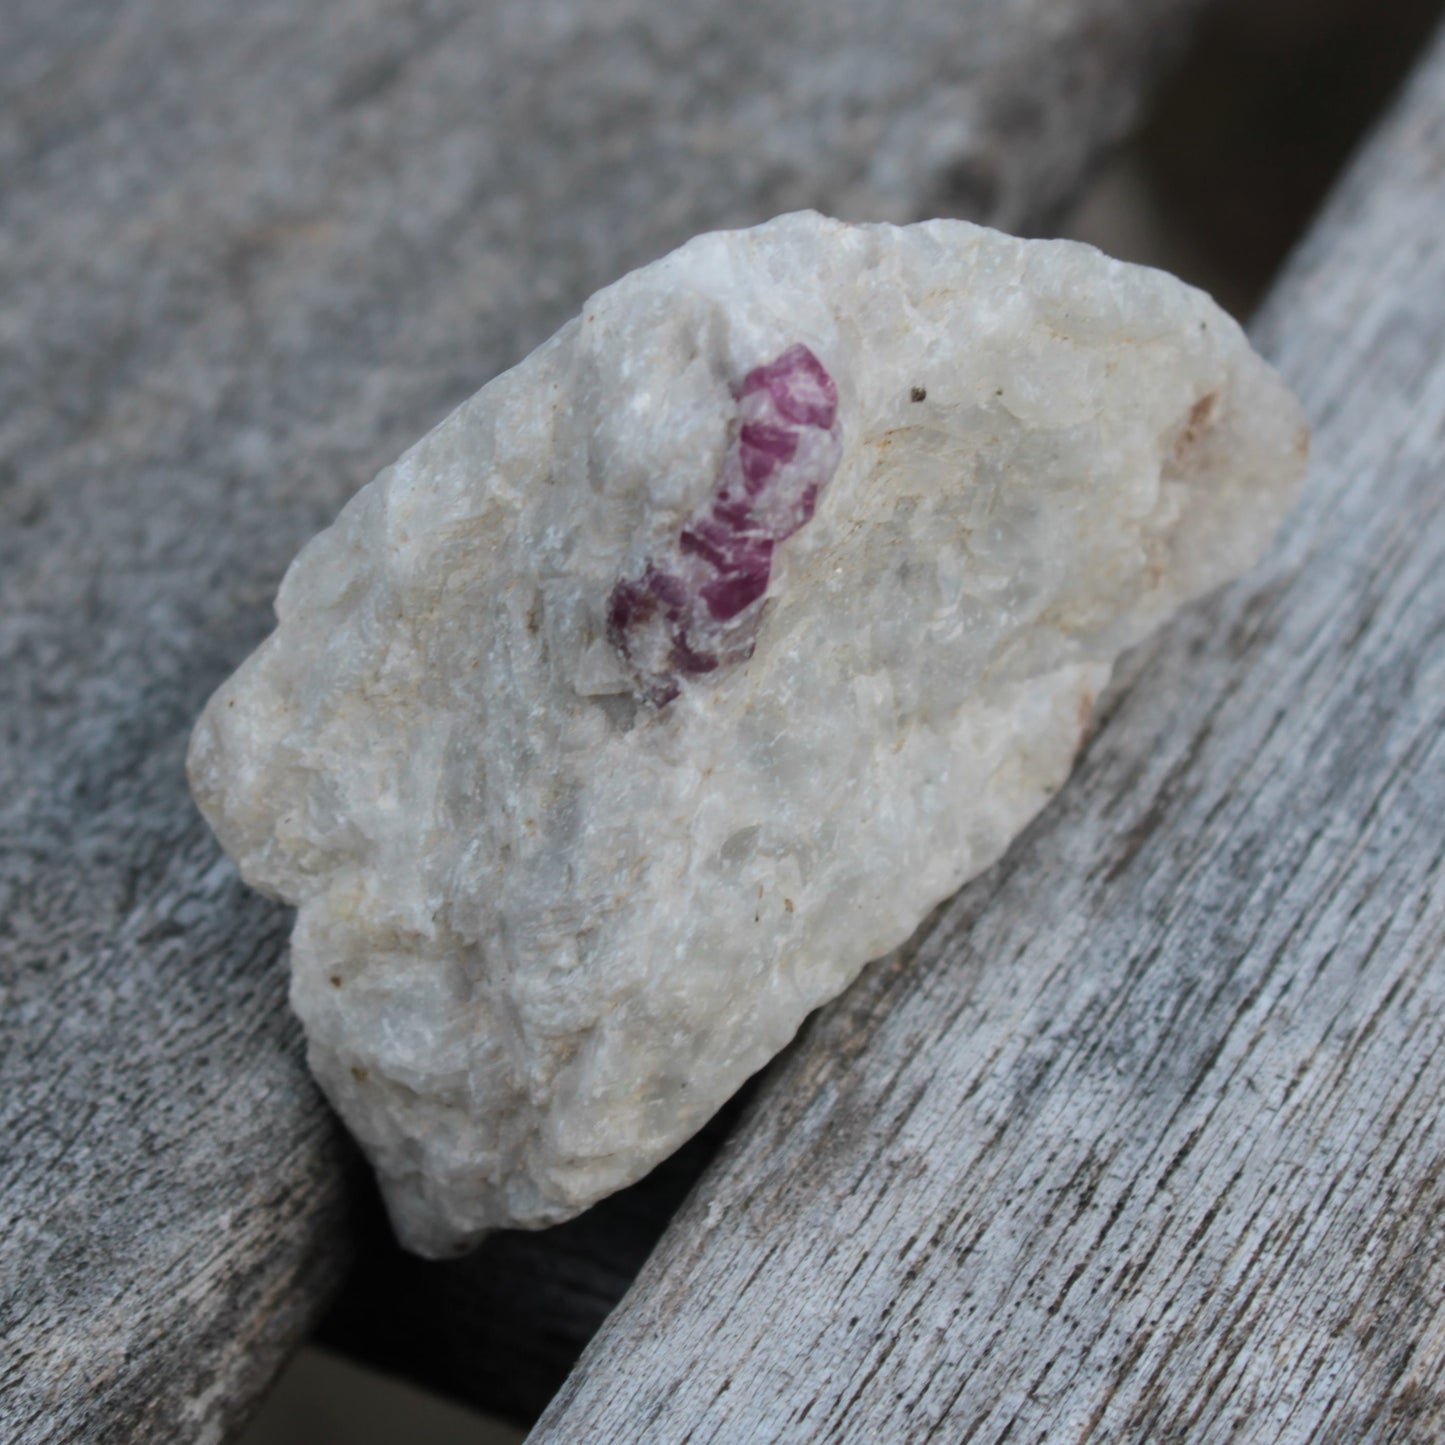 Ruby UV reactive with Muscovite in Marble 31.9g